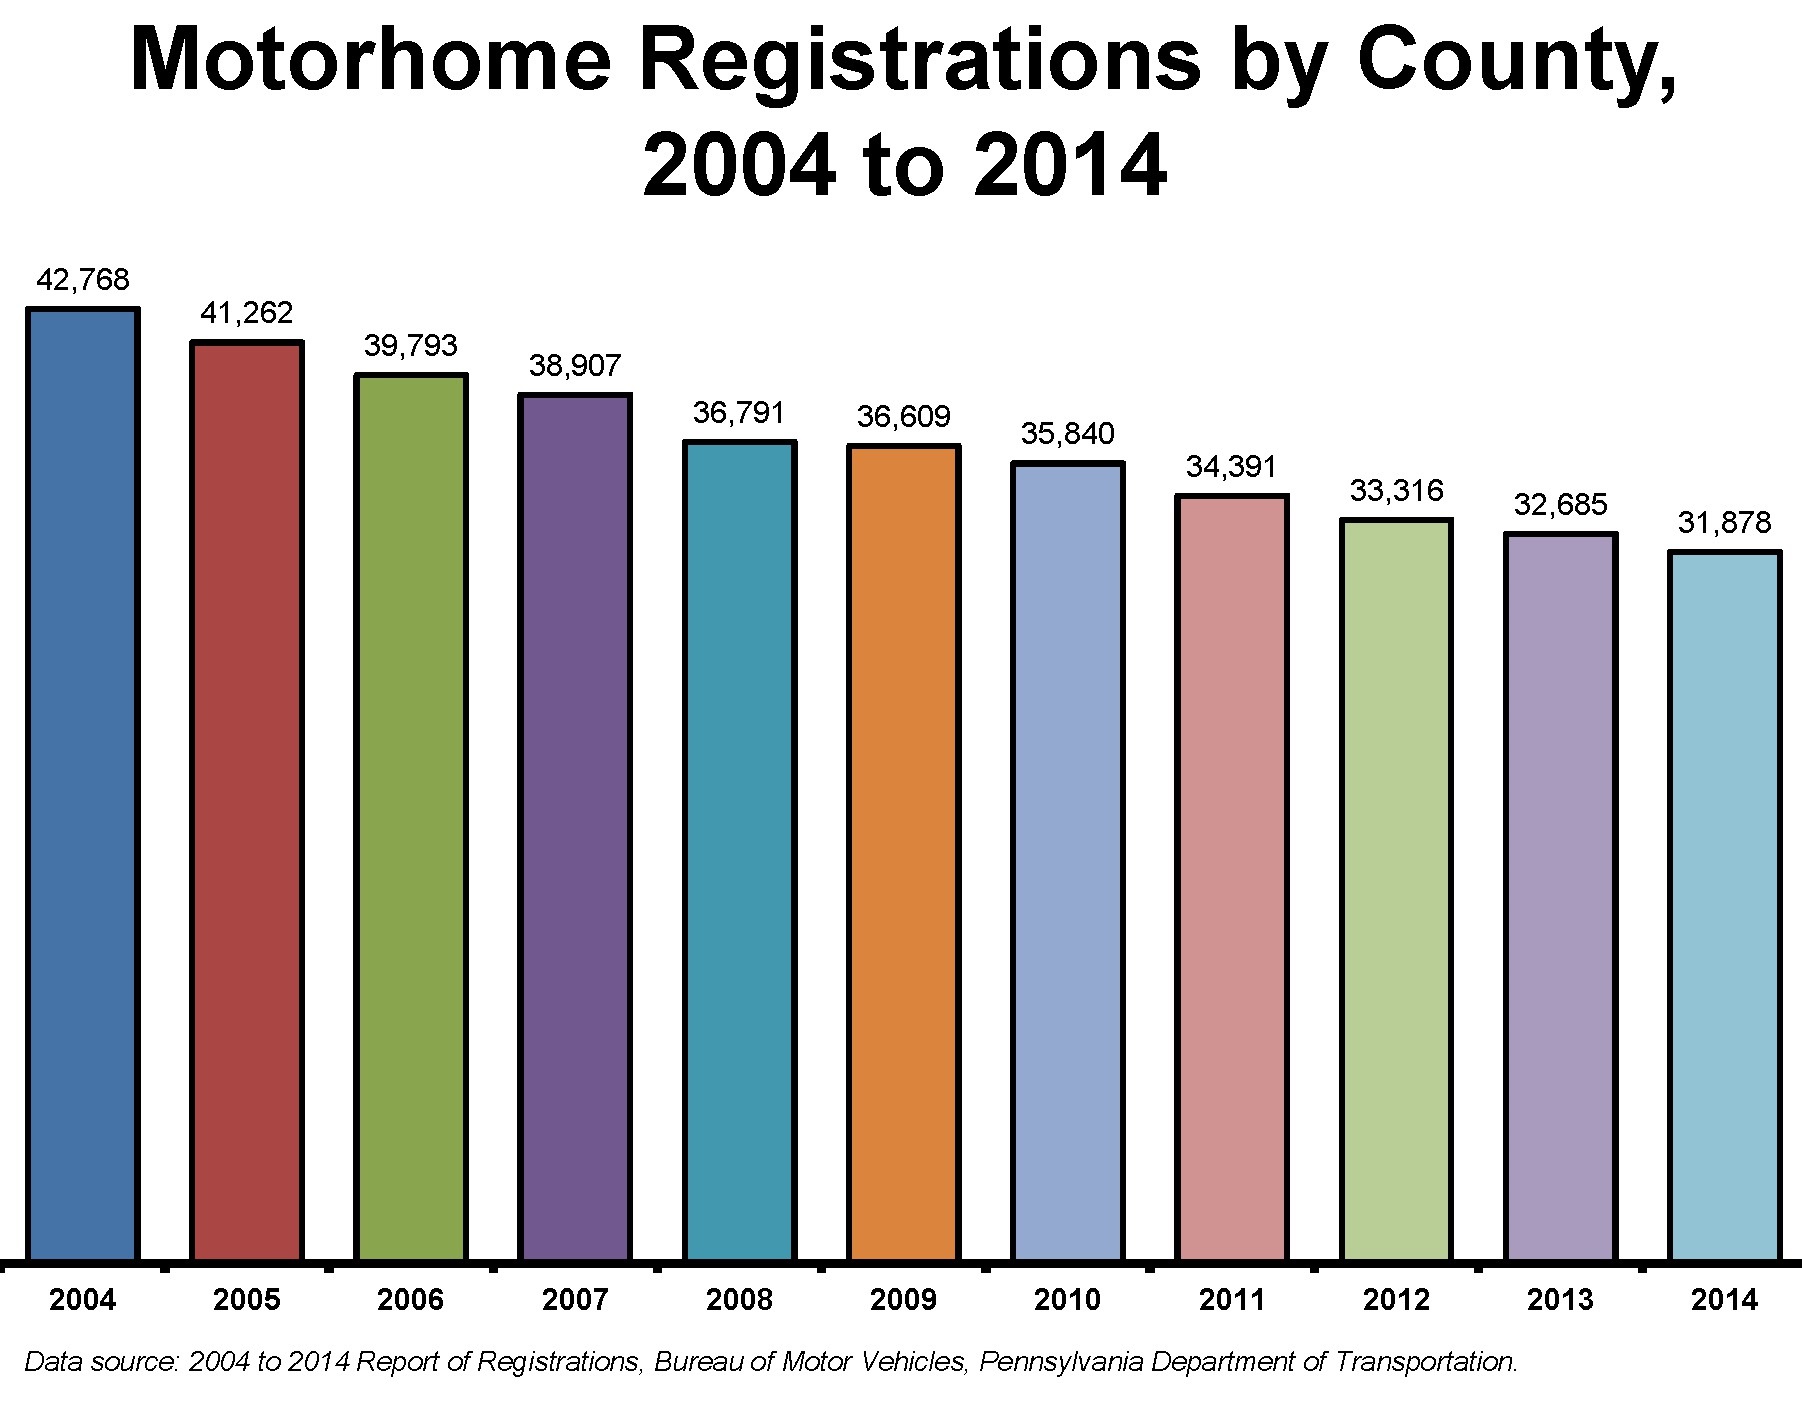 Motorhome Registrations in Pennsylvania by County